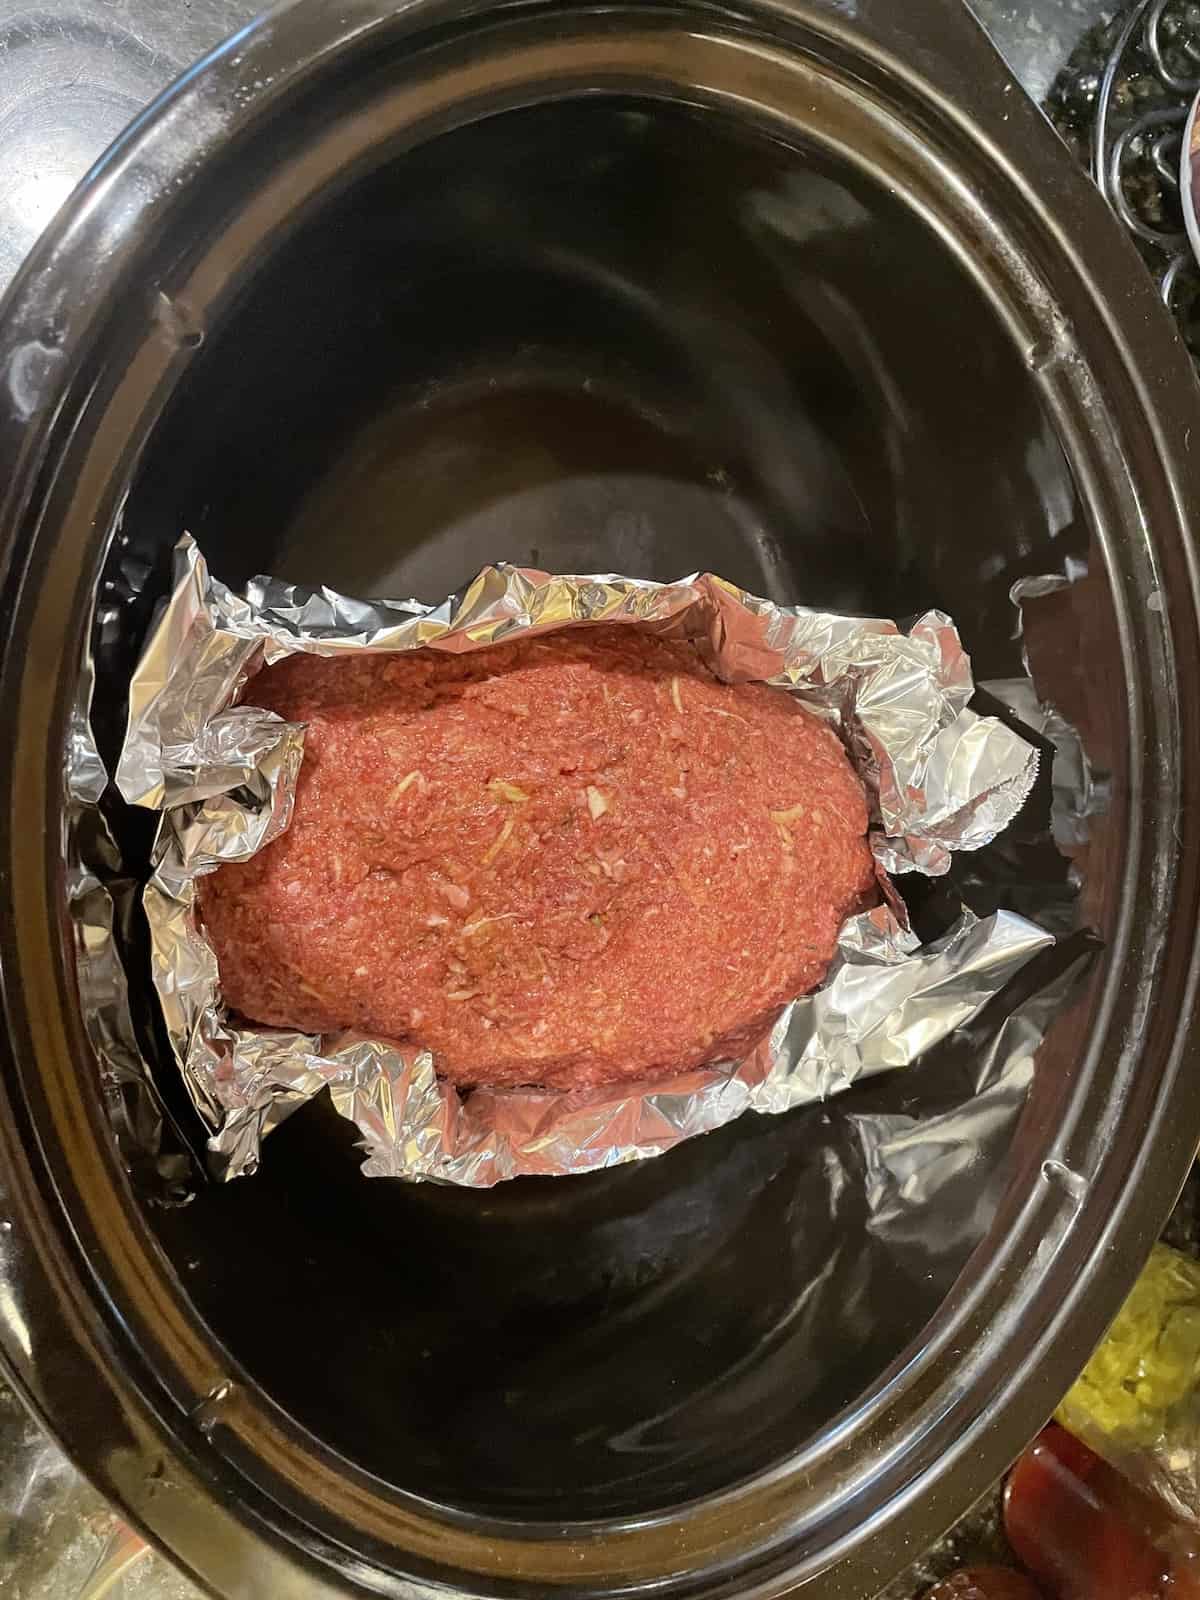 meatloaf wrapped in foil in a slow cooker